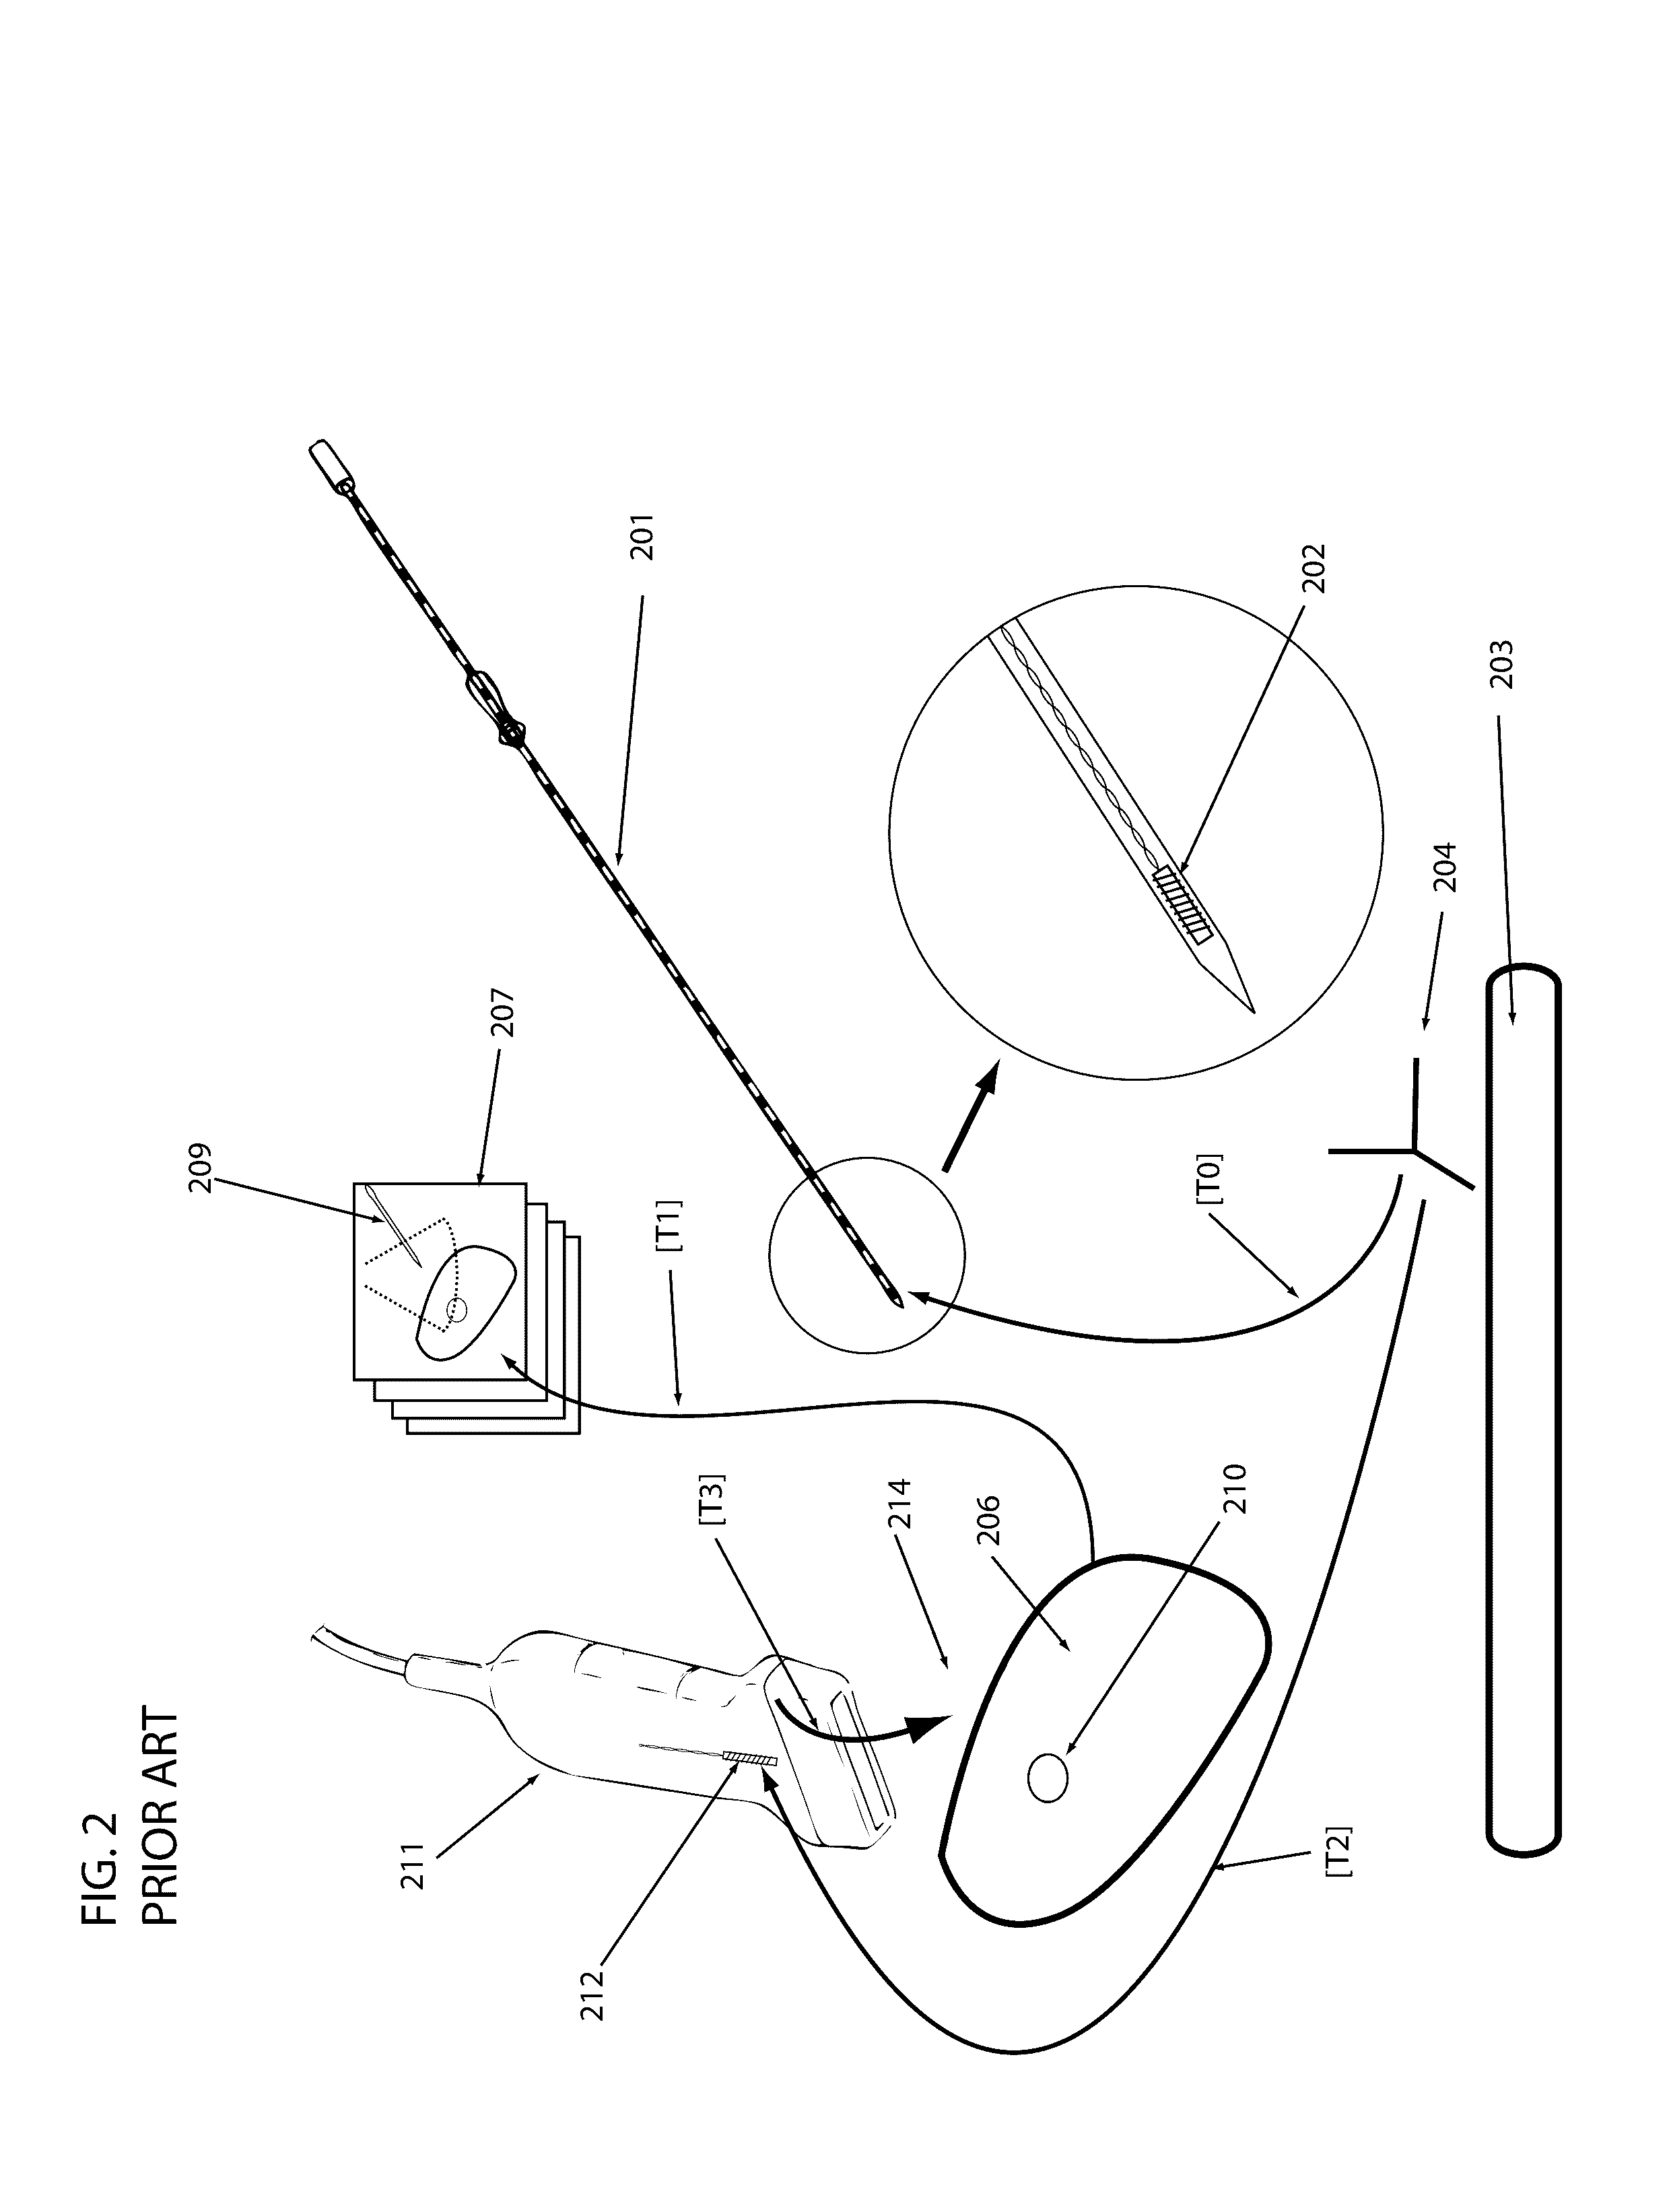 Systems, methods, and devices for assisting or performing guided interventional procedures using custom templates